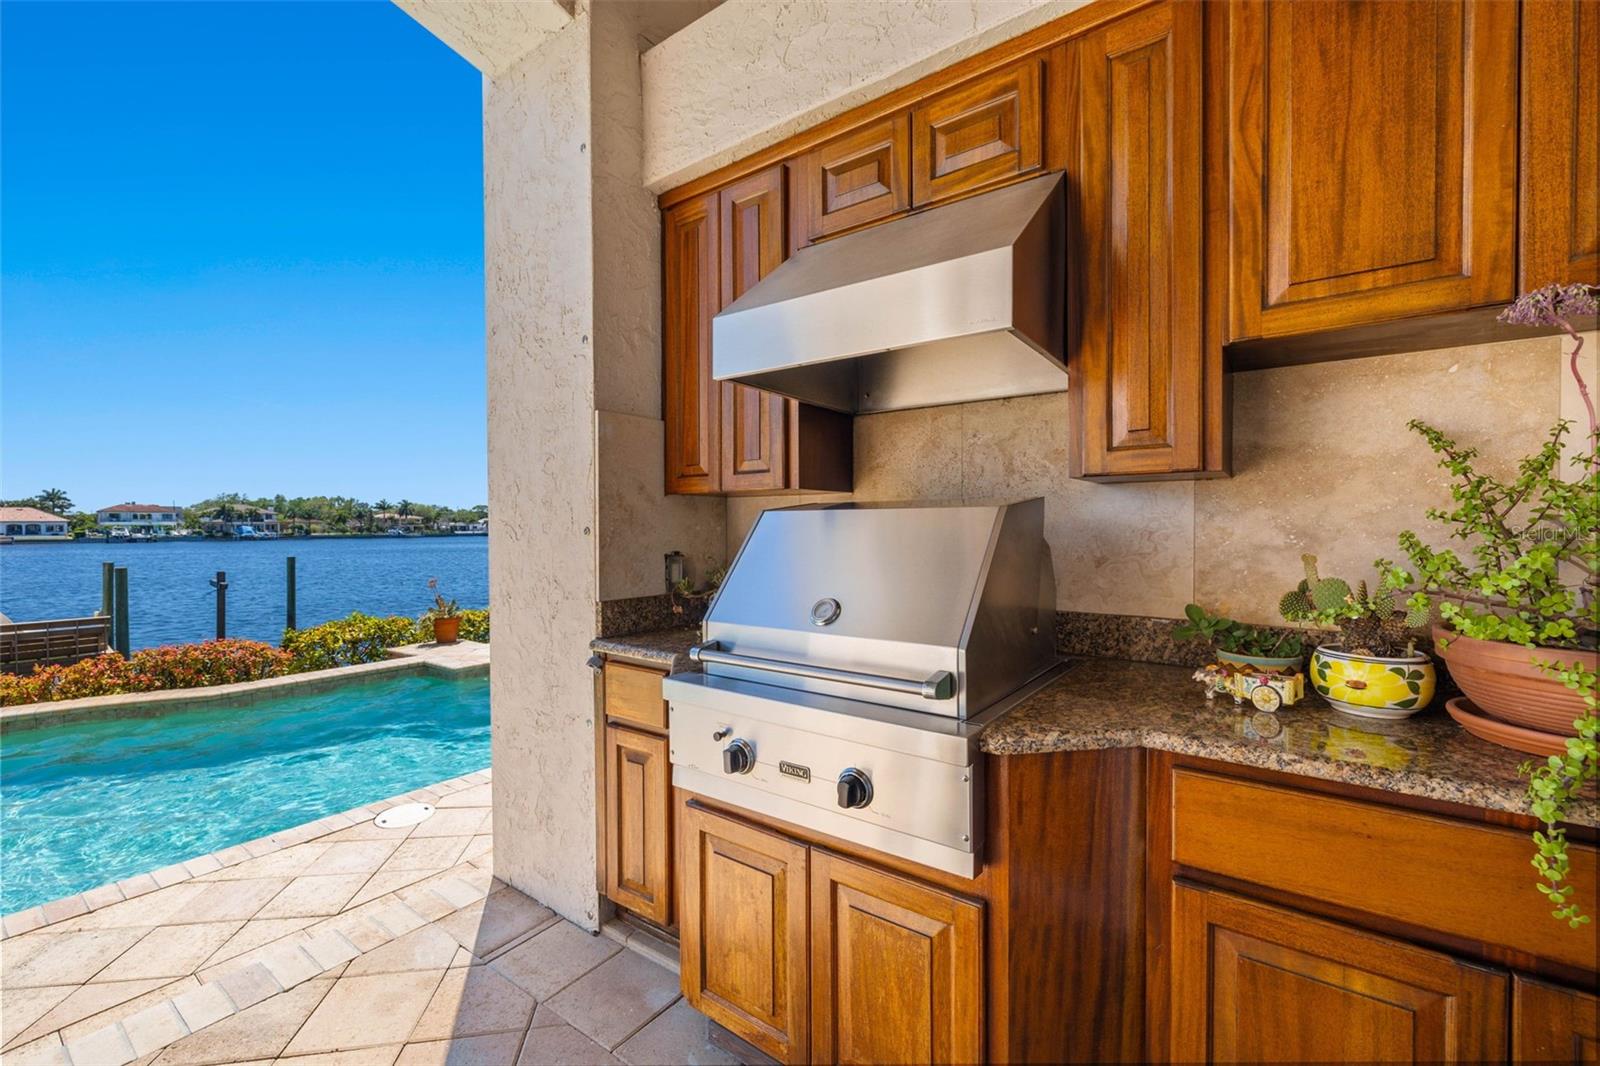 Gorgeous Outdoor cabinetry and Viking Grill